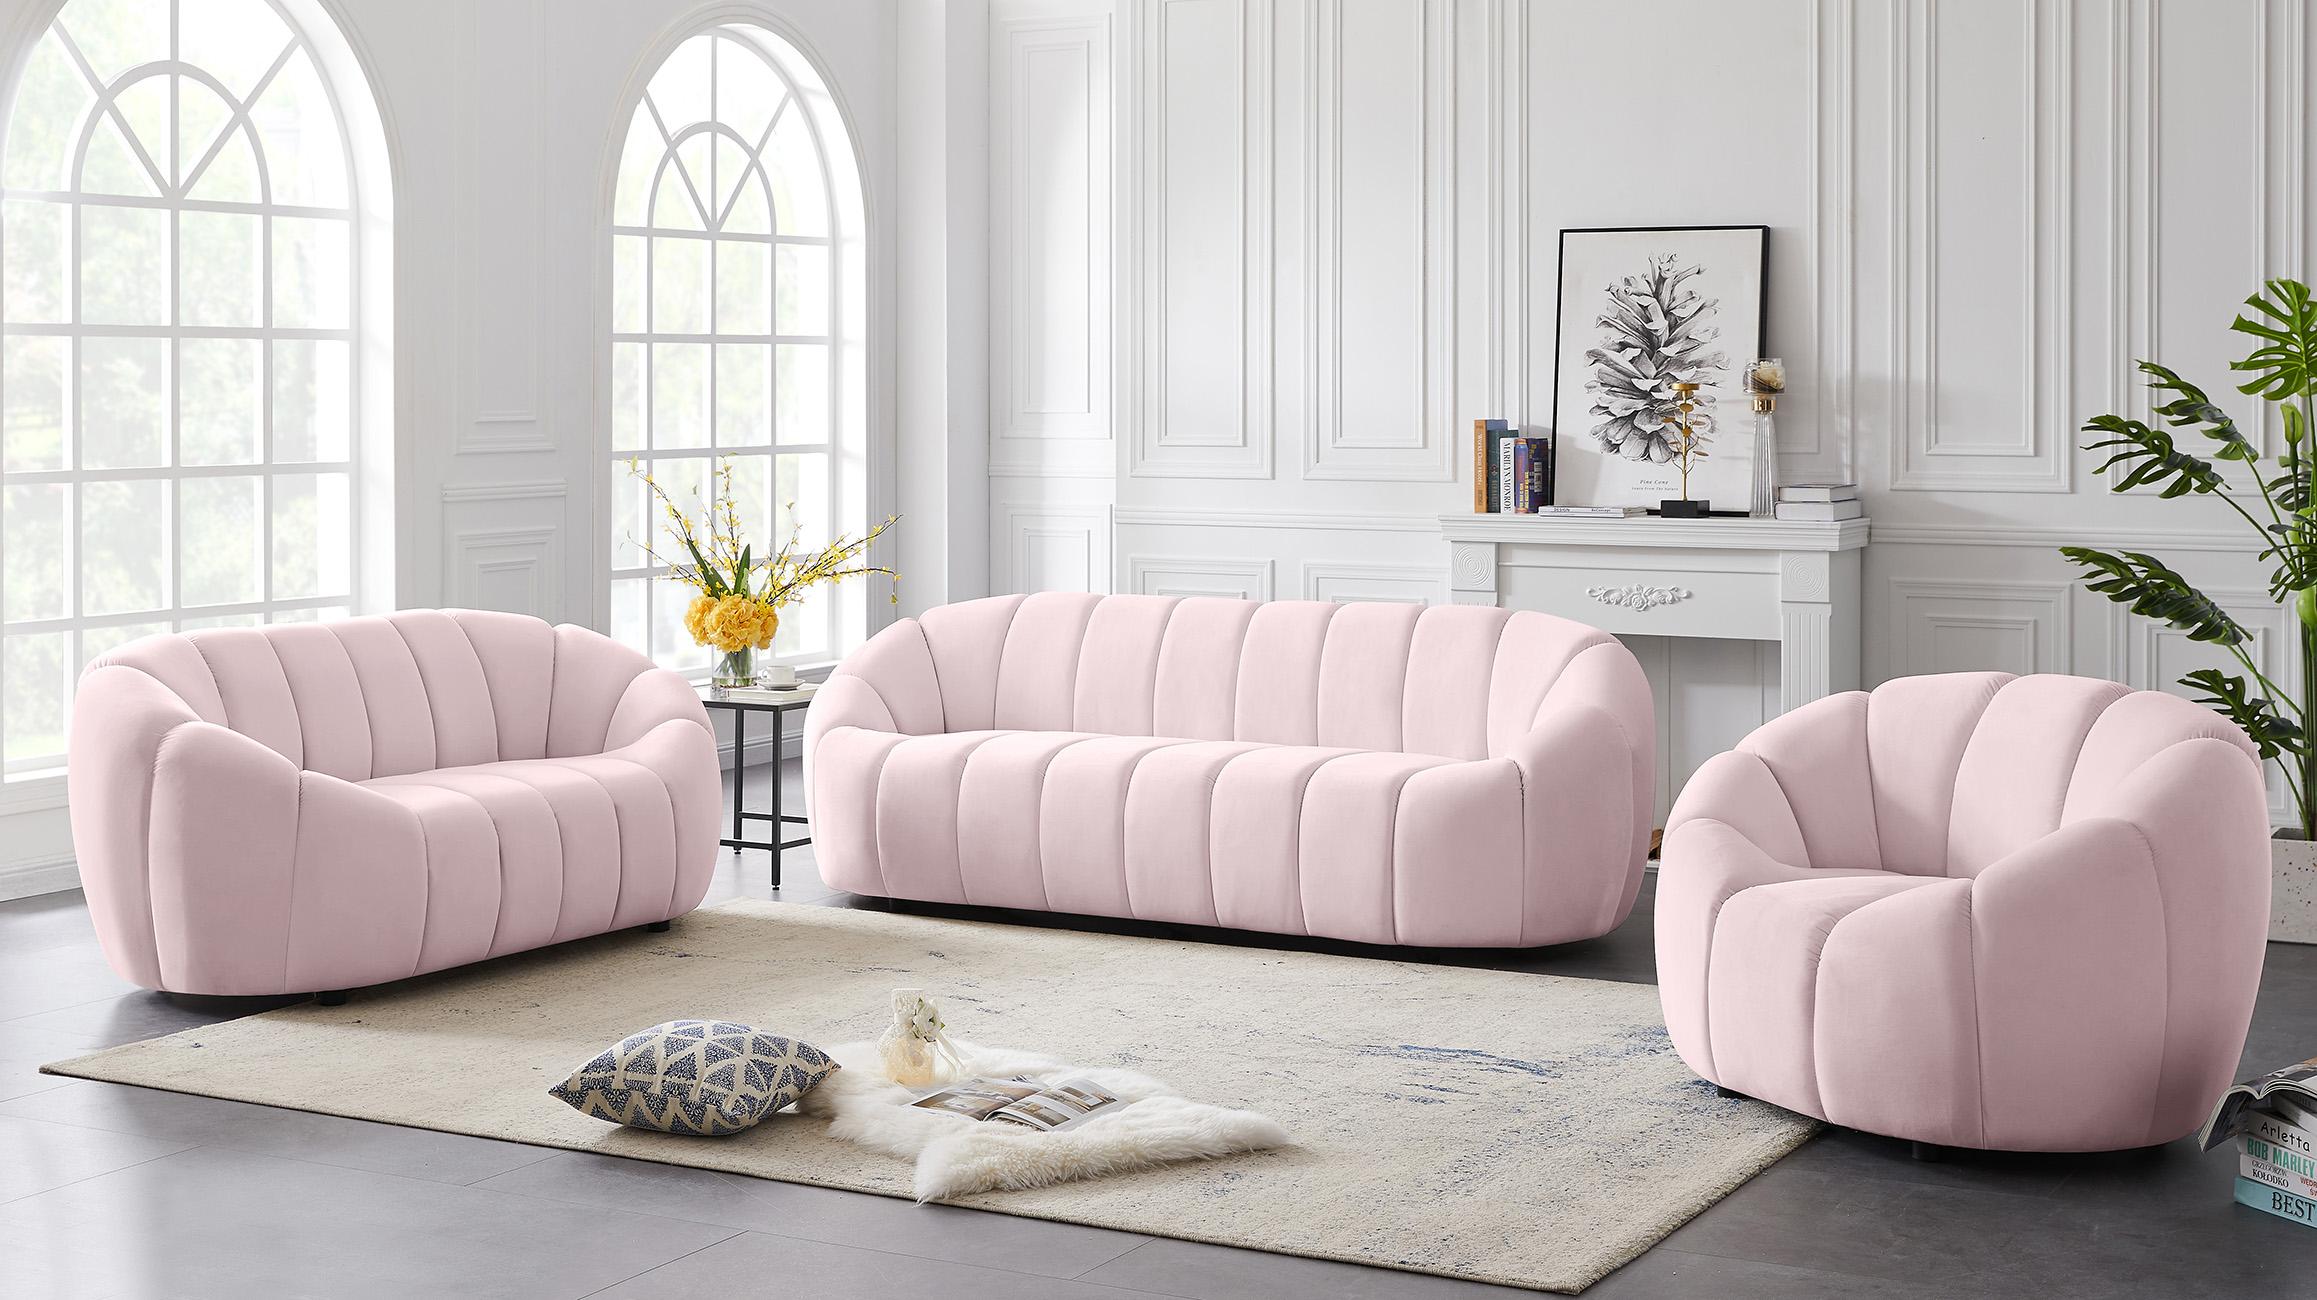 

    
613Pink-C Meridian Furniture Arm Chairs
